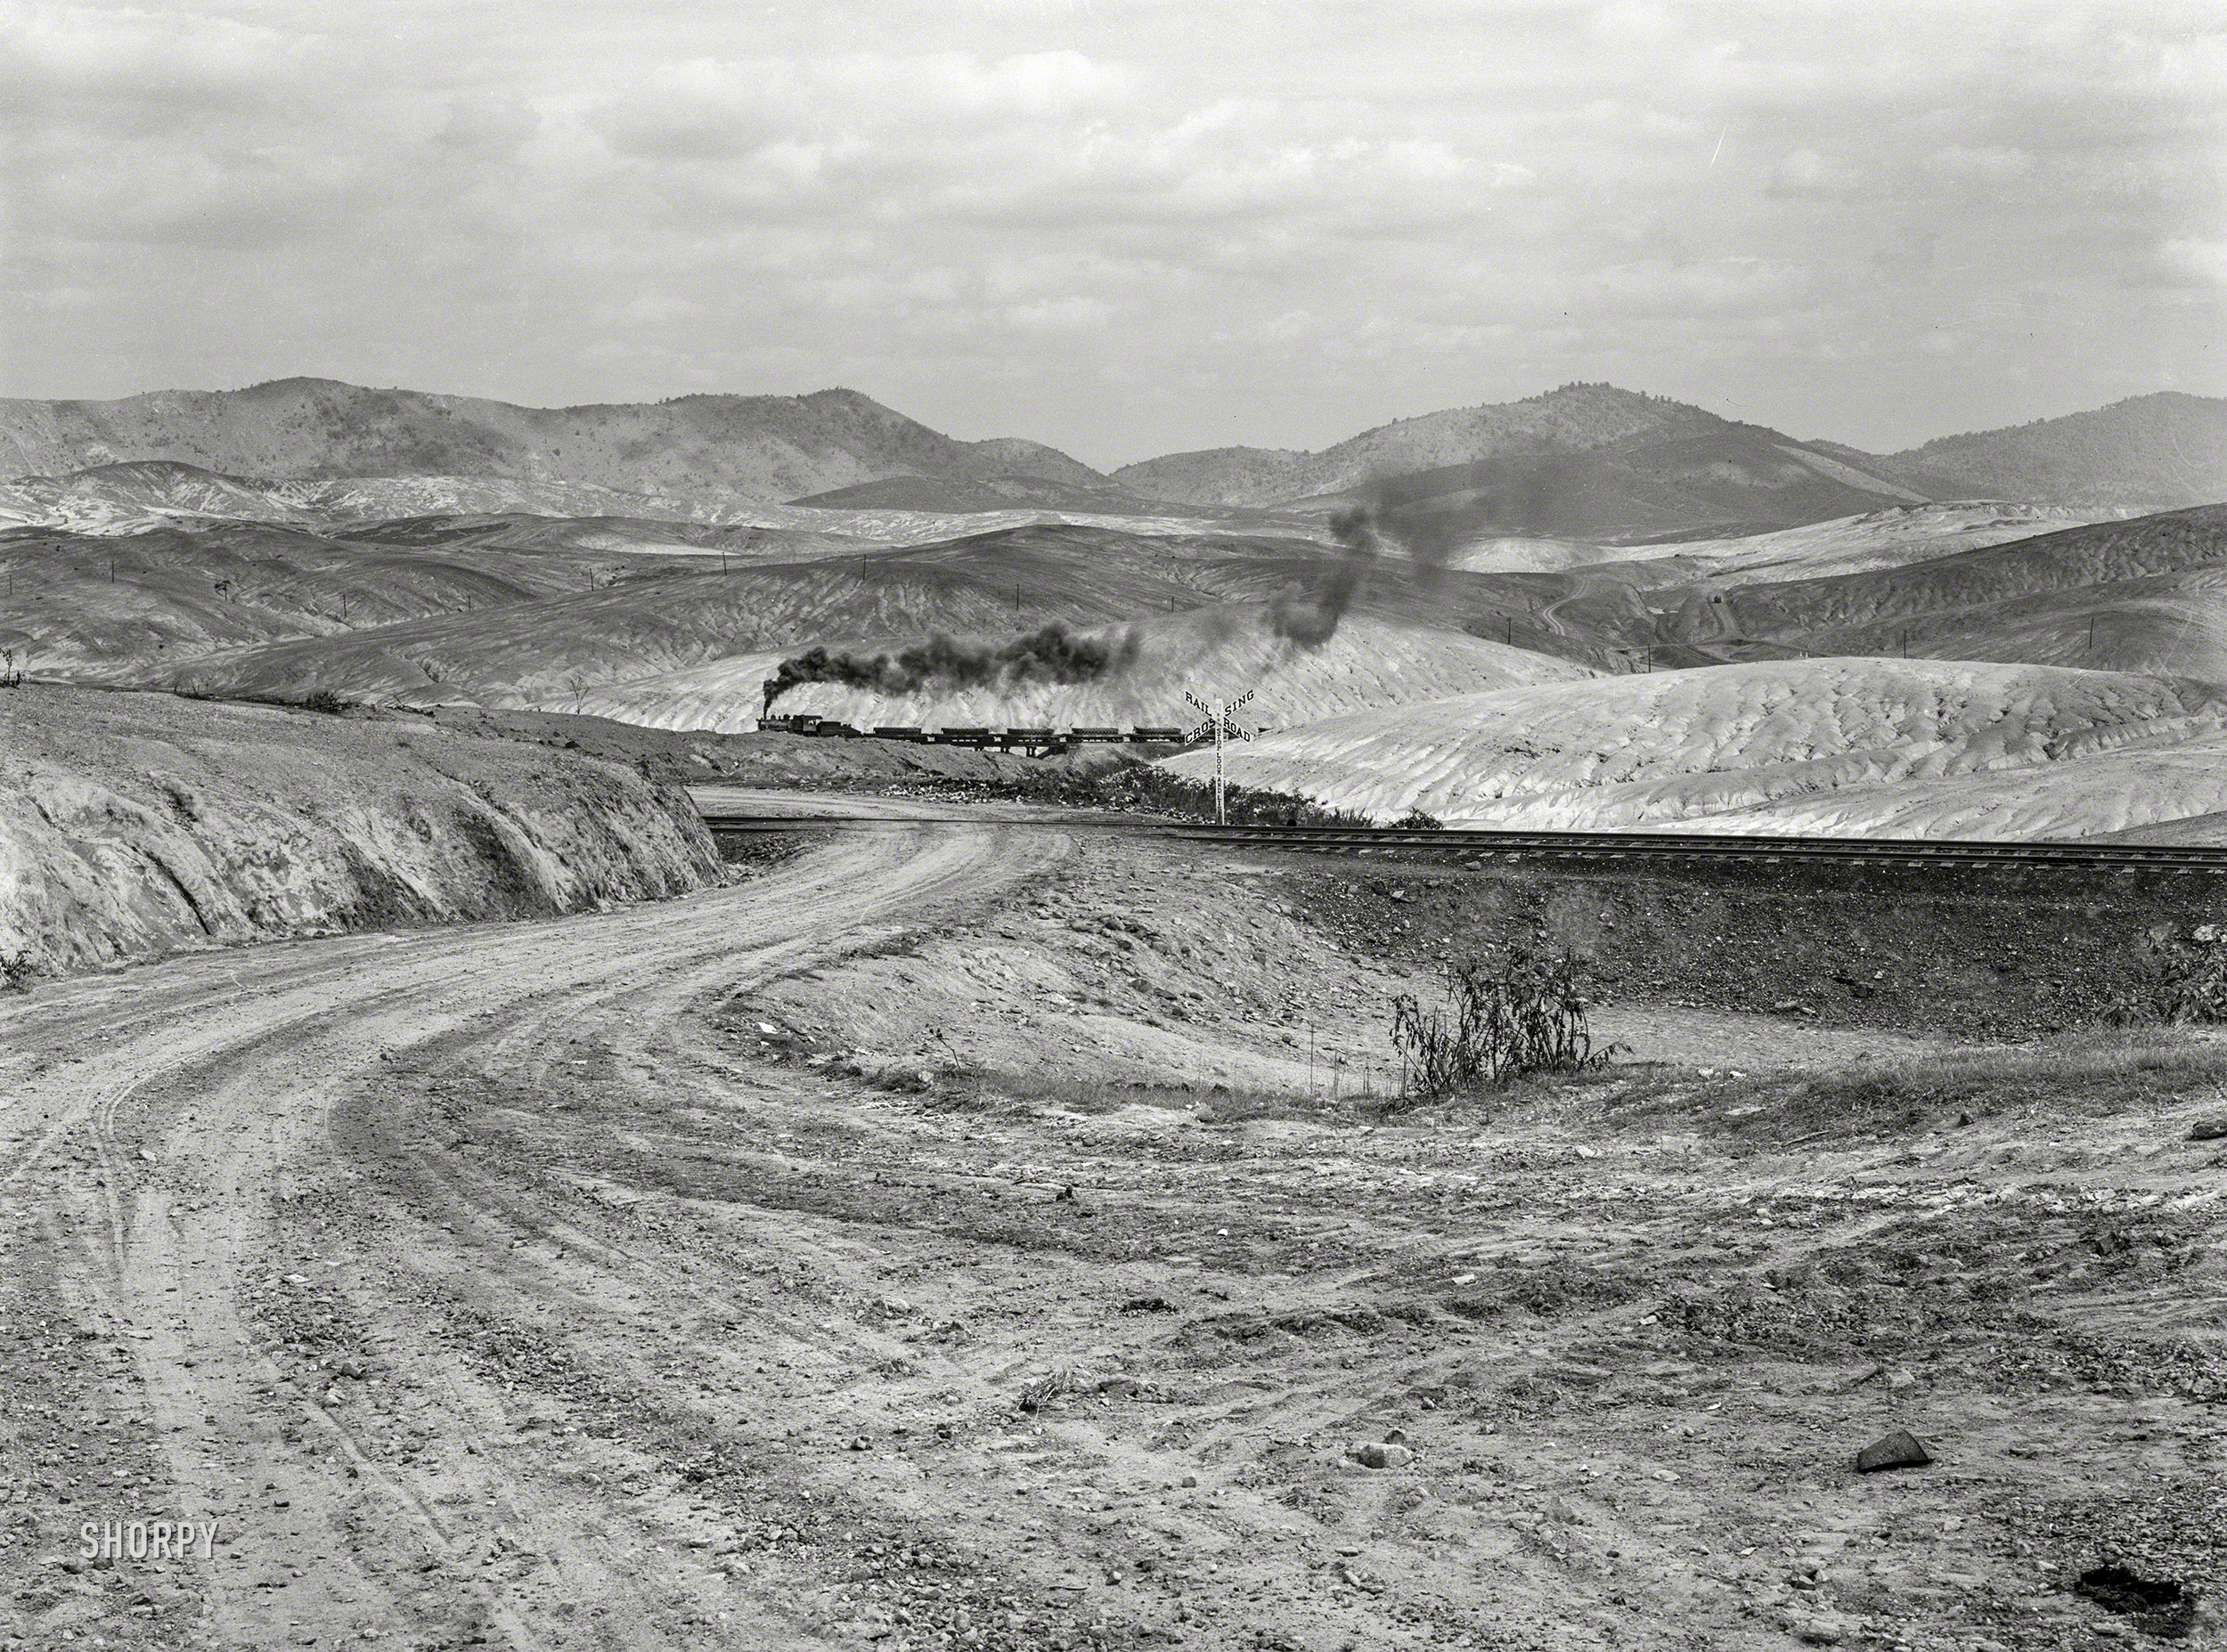 September 1939. "Ducktown, Tennessee. Train bringing copper ore out of mine. Fumes from smelting copper for sulfuric acid have destroyed all vegetation and eroded the land." Medium format negative by Marion Post Wolcott for the Farm Security Administration. View full size.